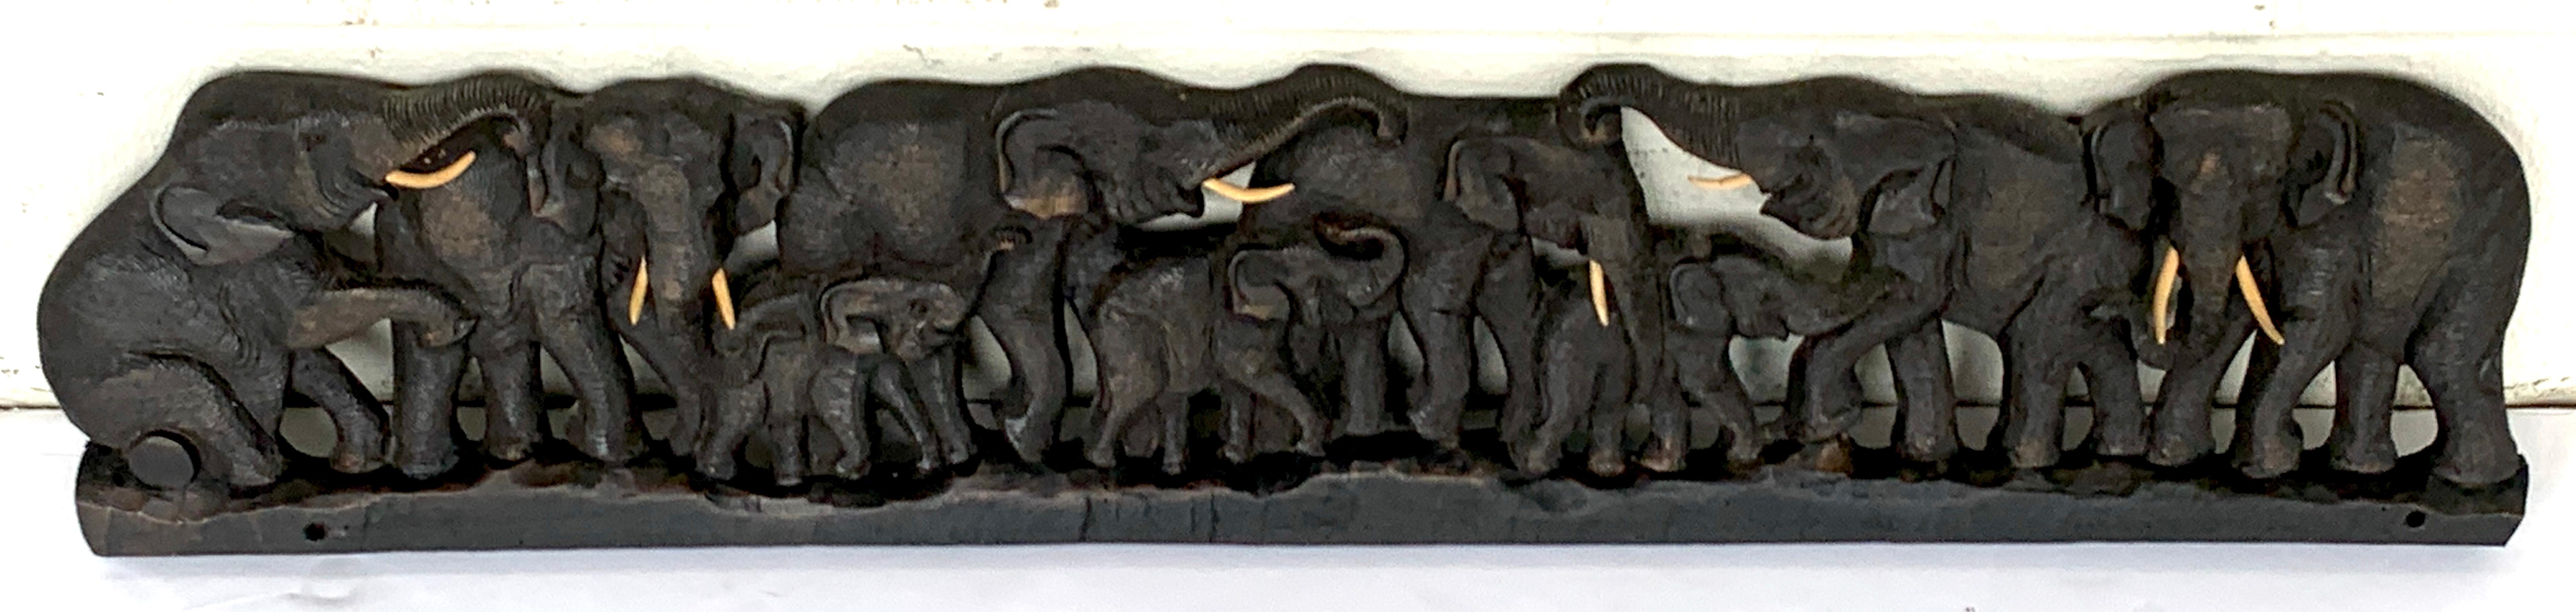 Midcentury carved teak wood 9 elephant panel, realistically carved with wood polychromed wood tusks, and mounting holes at base
Measures: 38 x 9 x 1.